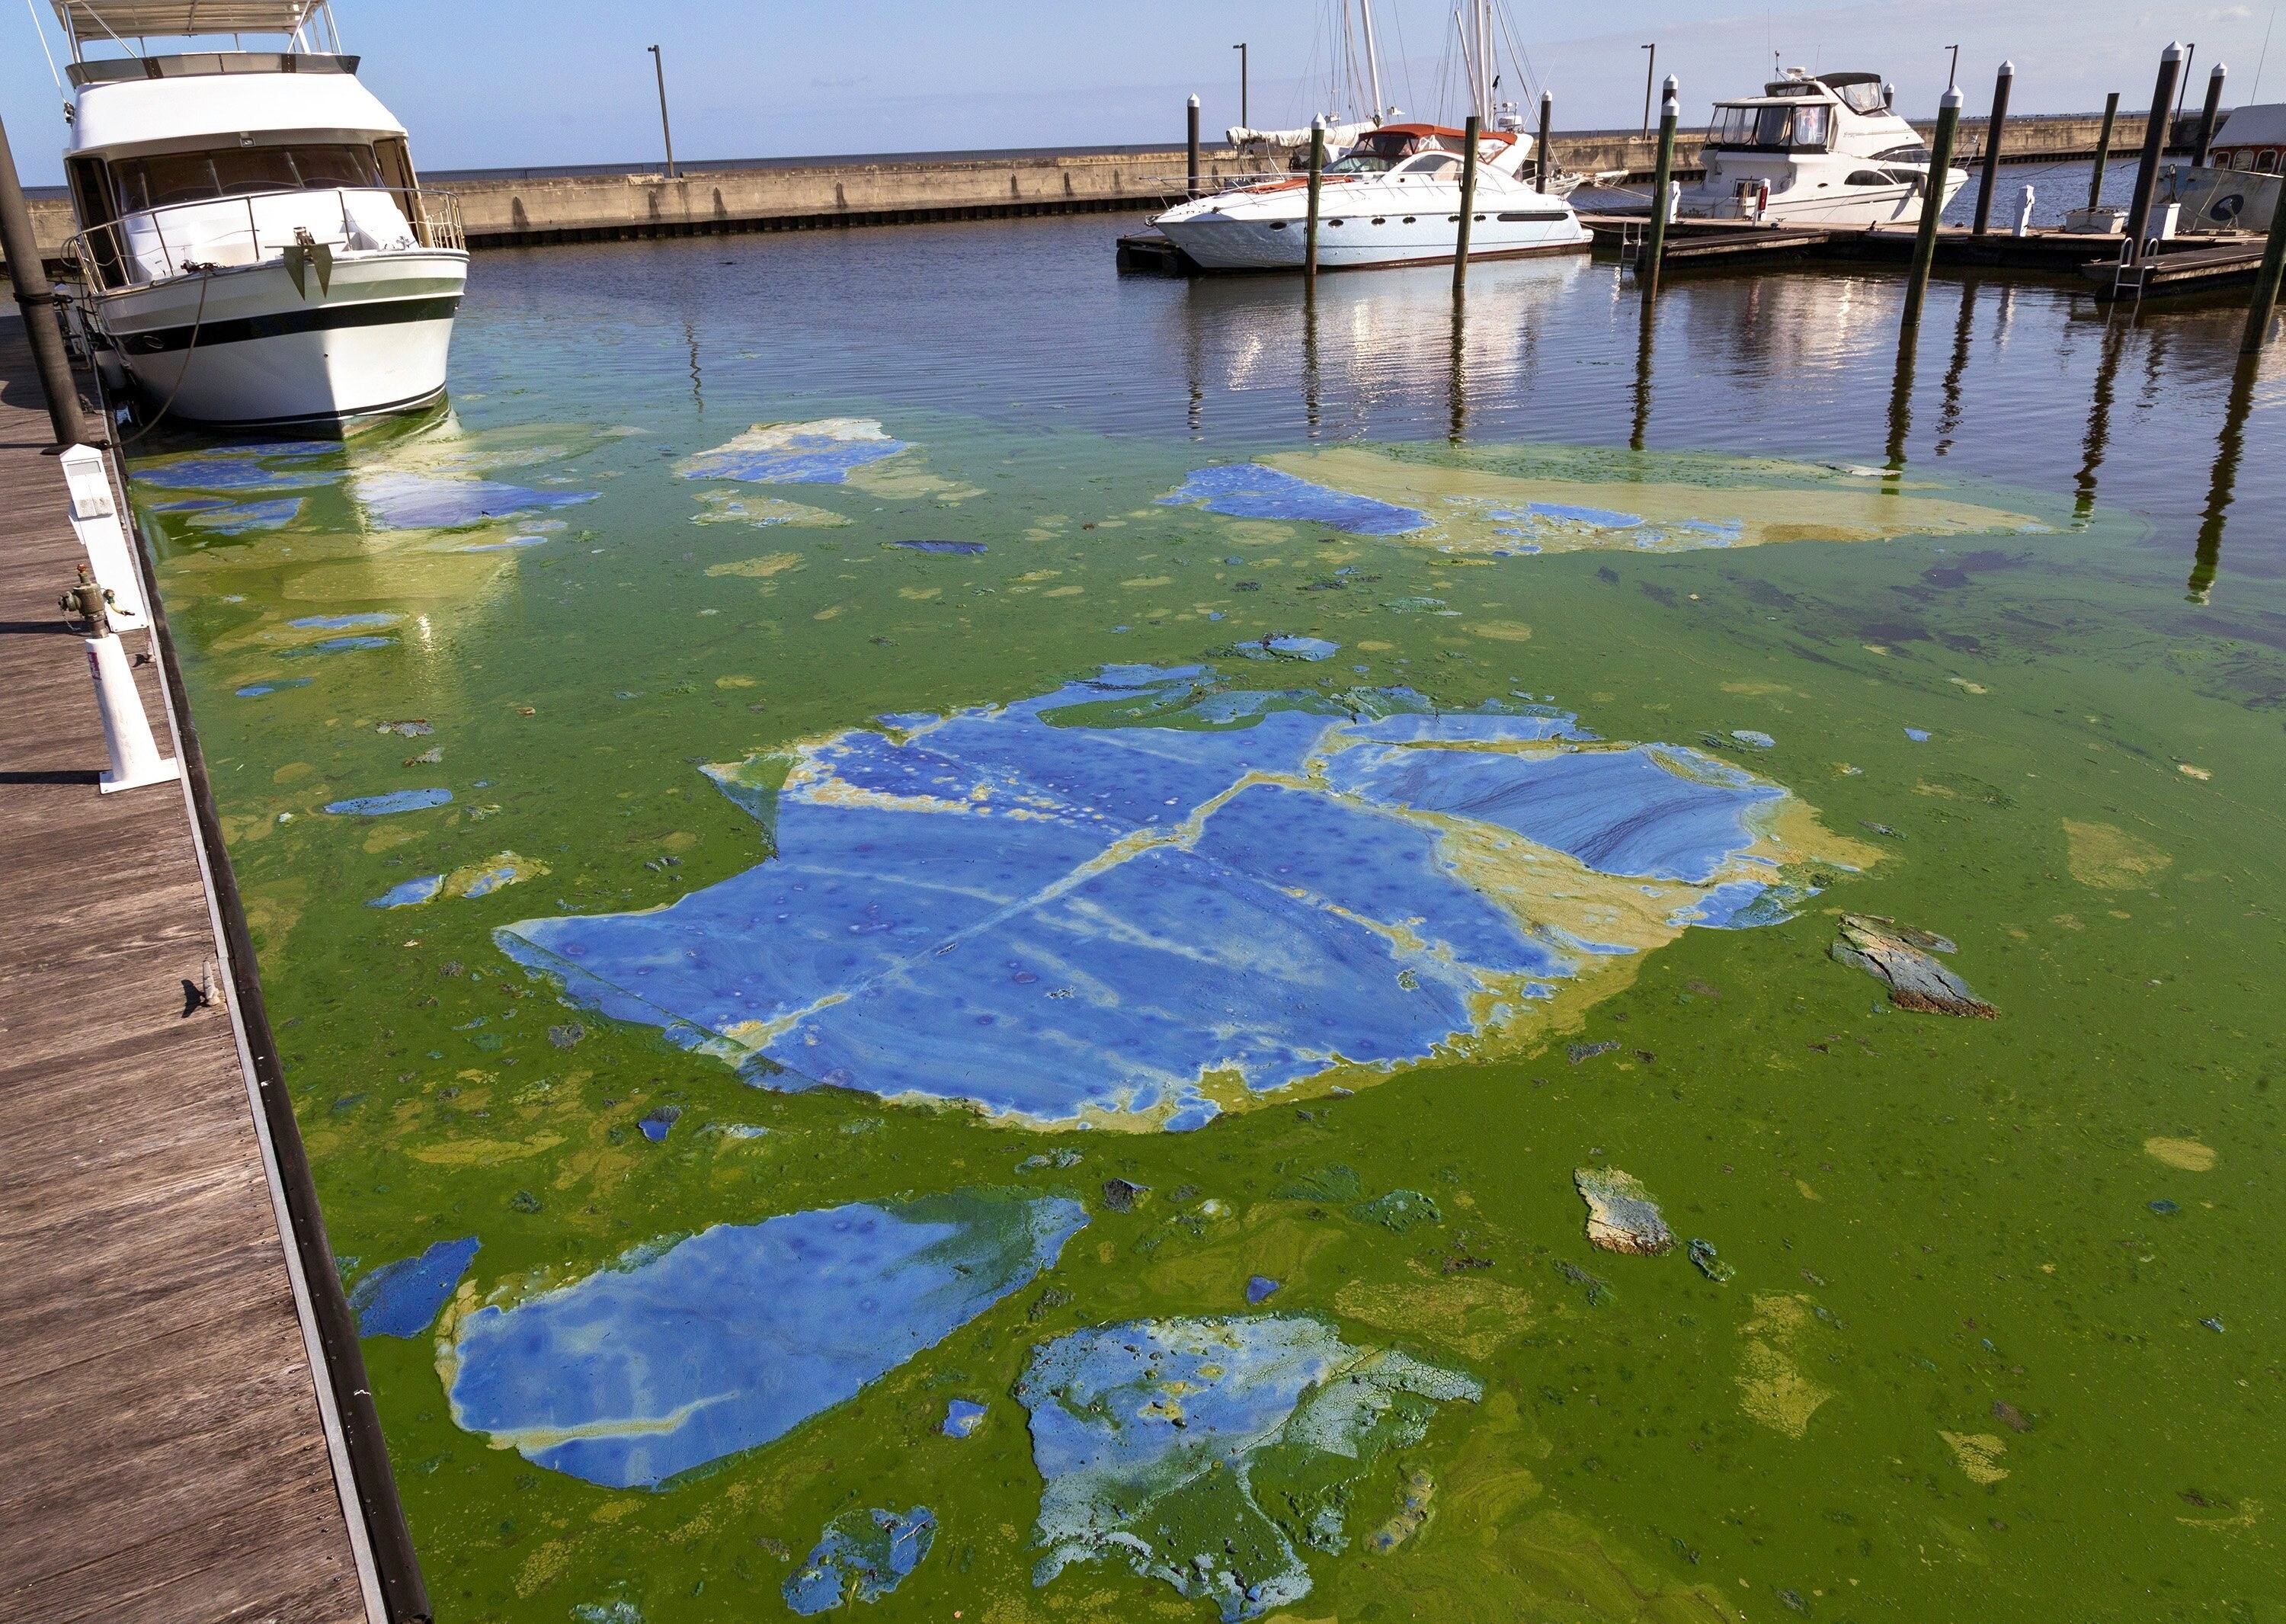 Thick blue-green algae surround boats in Florida